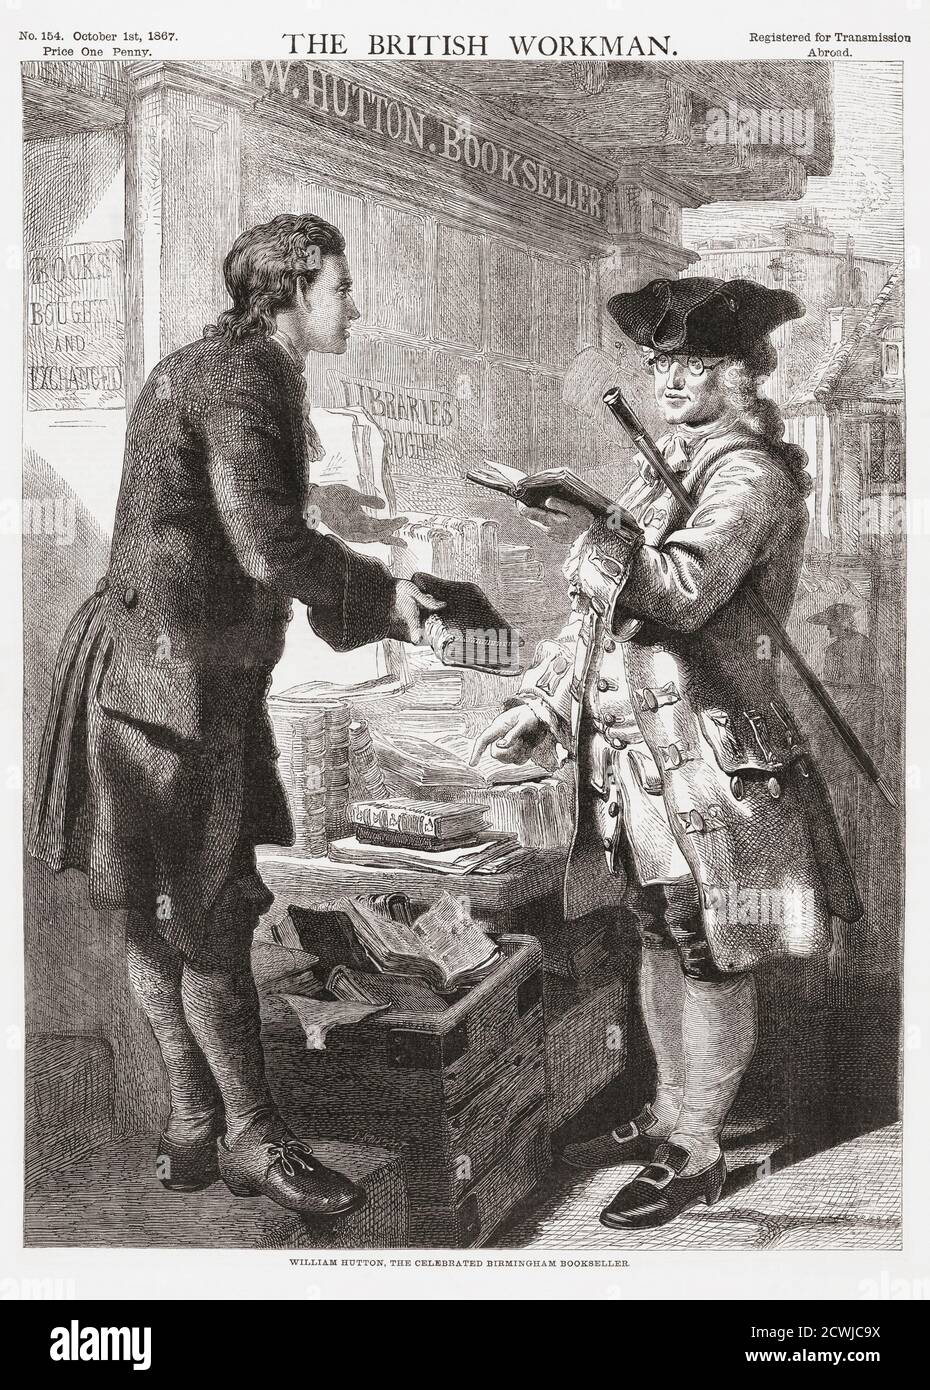 William Hutton selling a customer a book outside his Birmingham shop.  William Hutton, 1723 - 1815. English bookseller, poet, historian and travel writer.  He was the first important historian of the city of Birmingham and authored a book, History of Birmingham in 1781.  After an engraving by an unknown artist on the front cover of The British Workman, published October I, 1867. Stock Photo